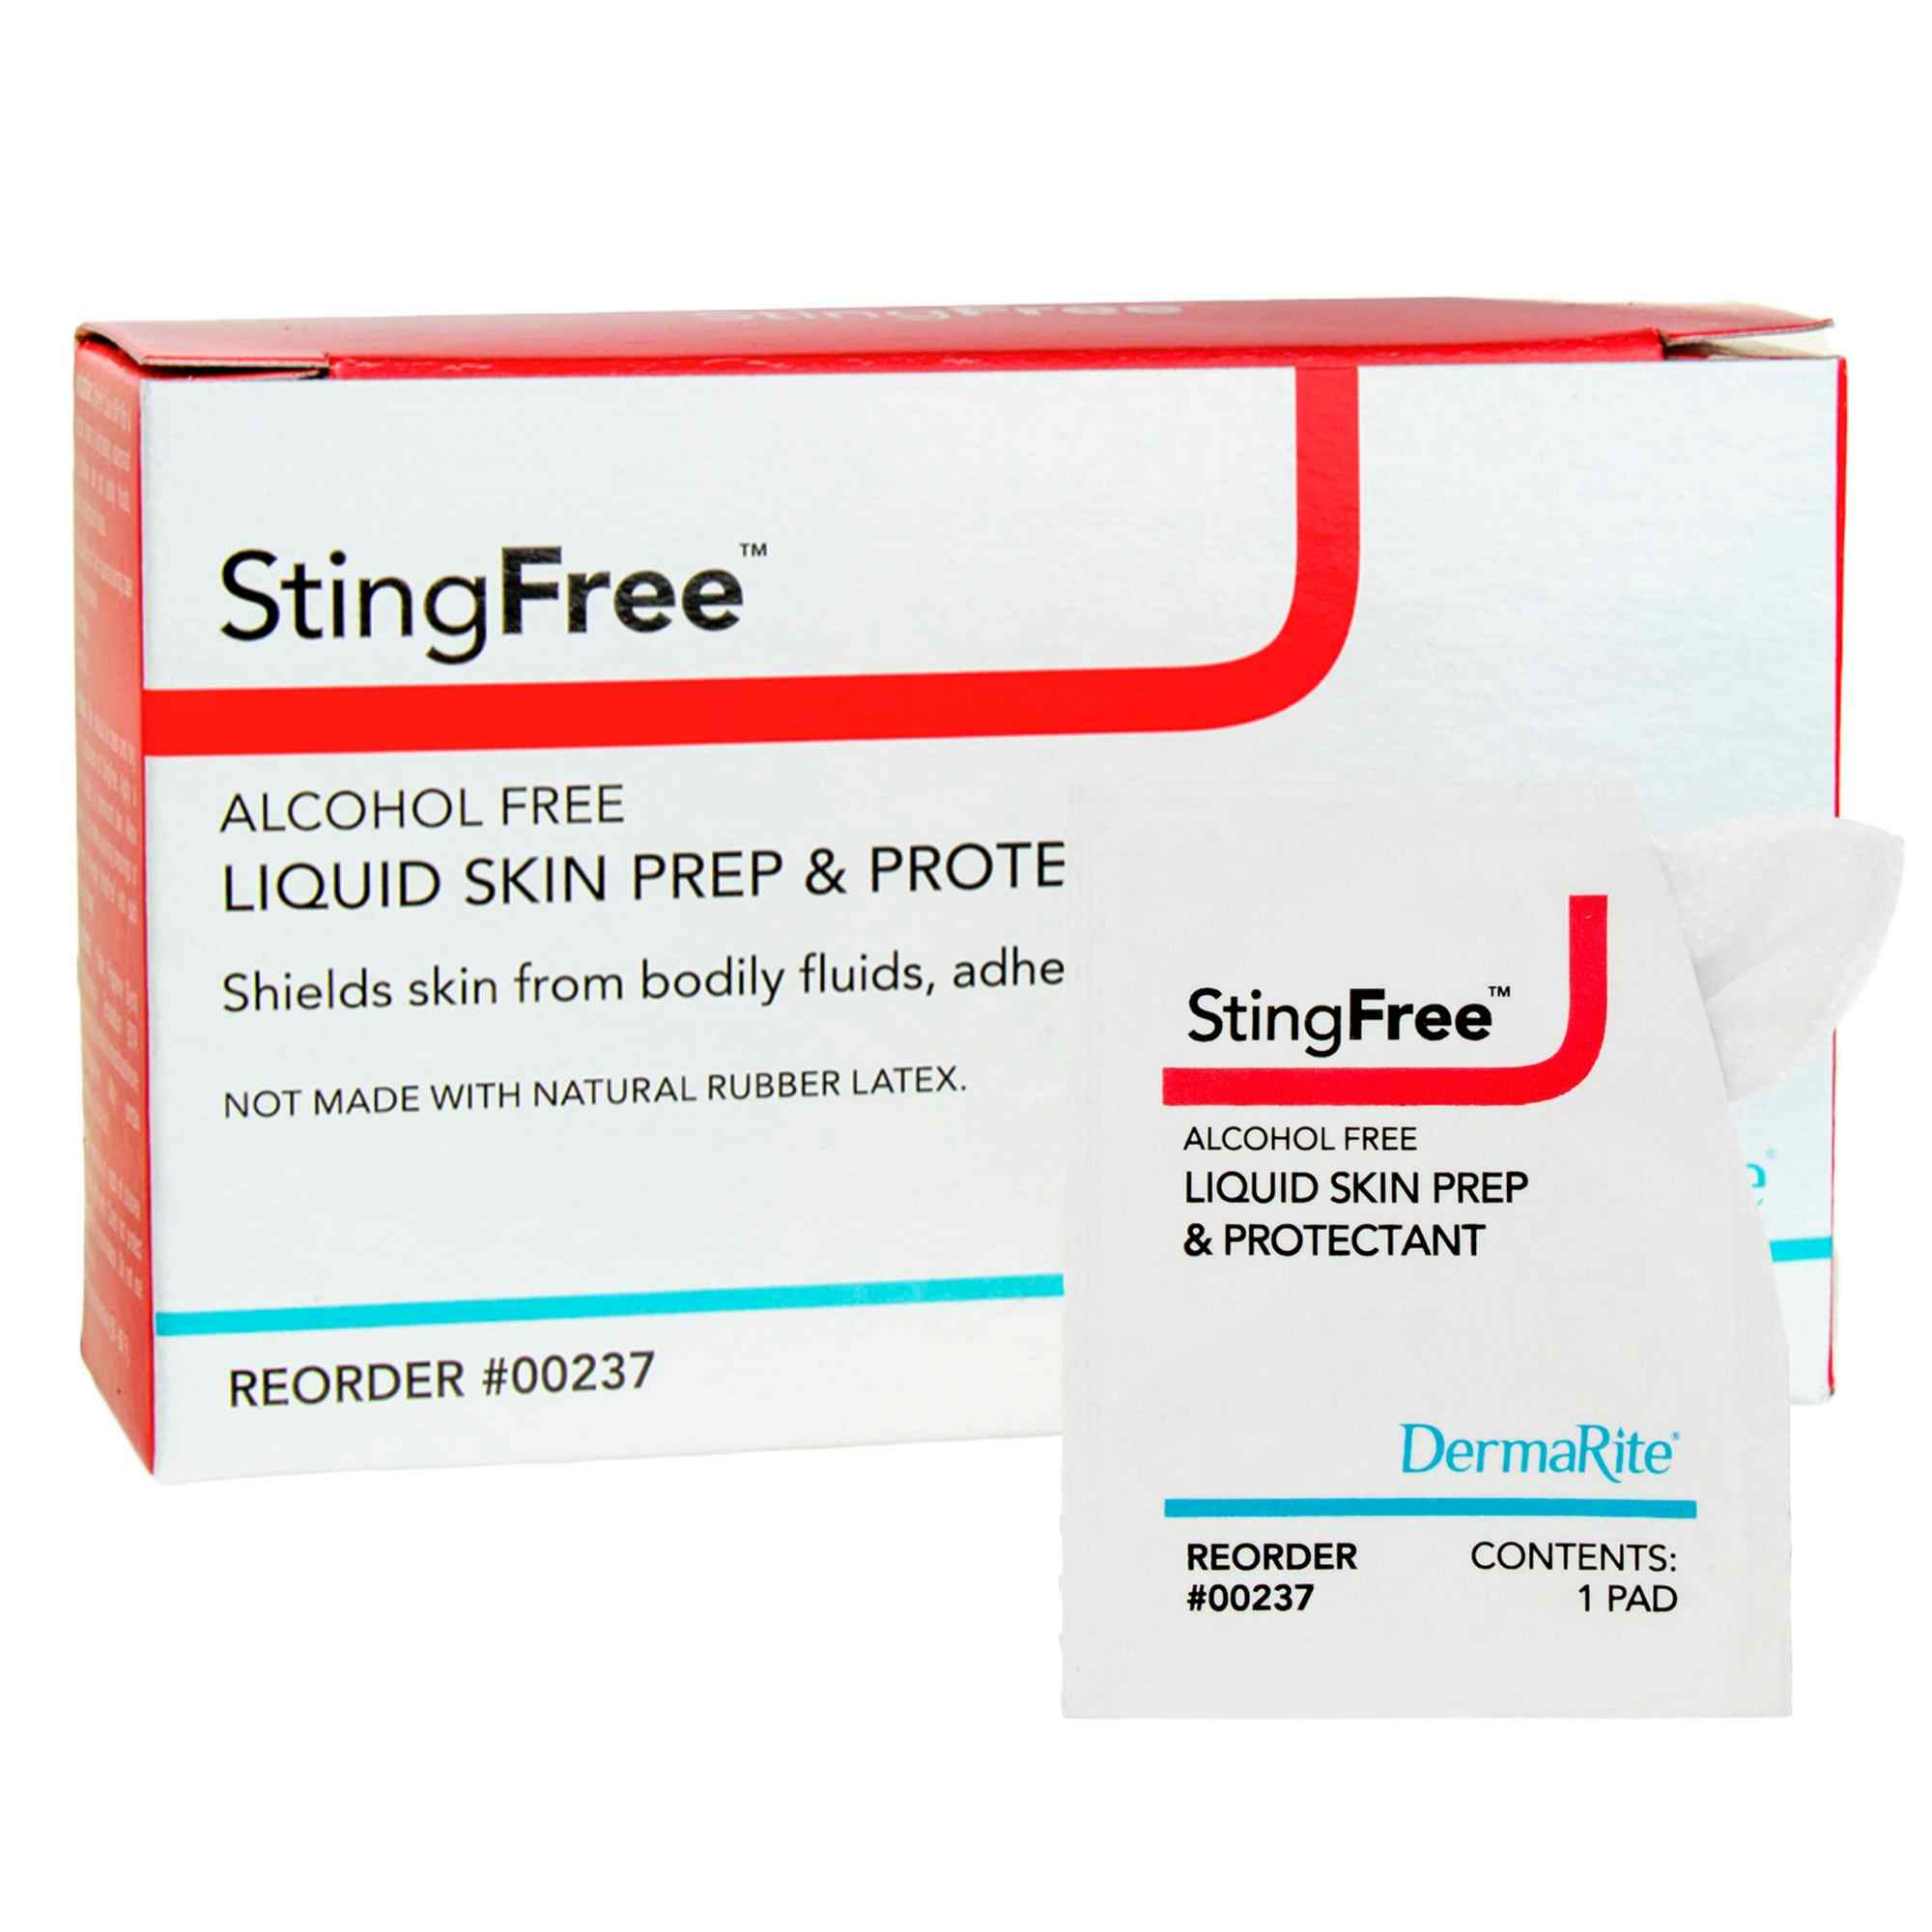 Sting Free AlcoholFree Liquid Skin Prep & Pote Packets, 237, Box of 50